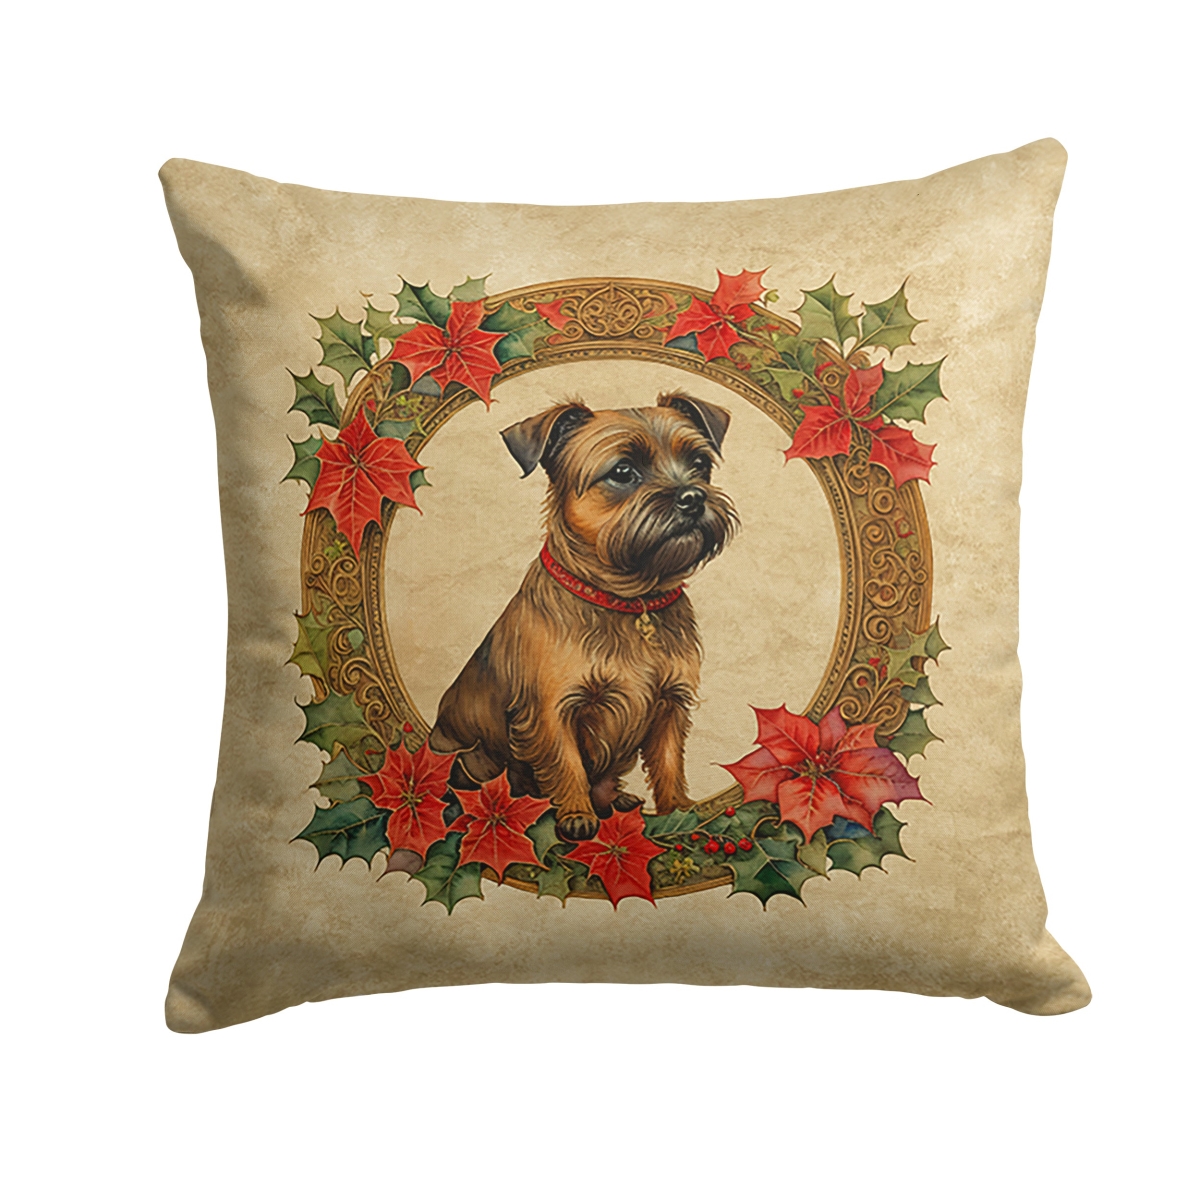 Caroline's Treasures DAC2325PW1818 18 x 18 in. Unisex Border Terrier Christmas Flowers Polyester Fabric Throw Pillow